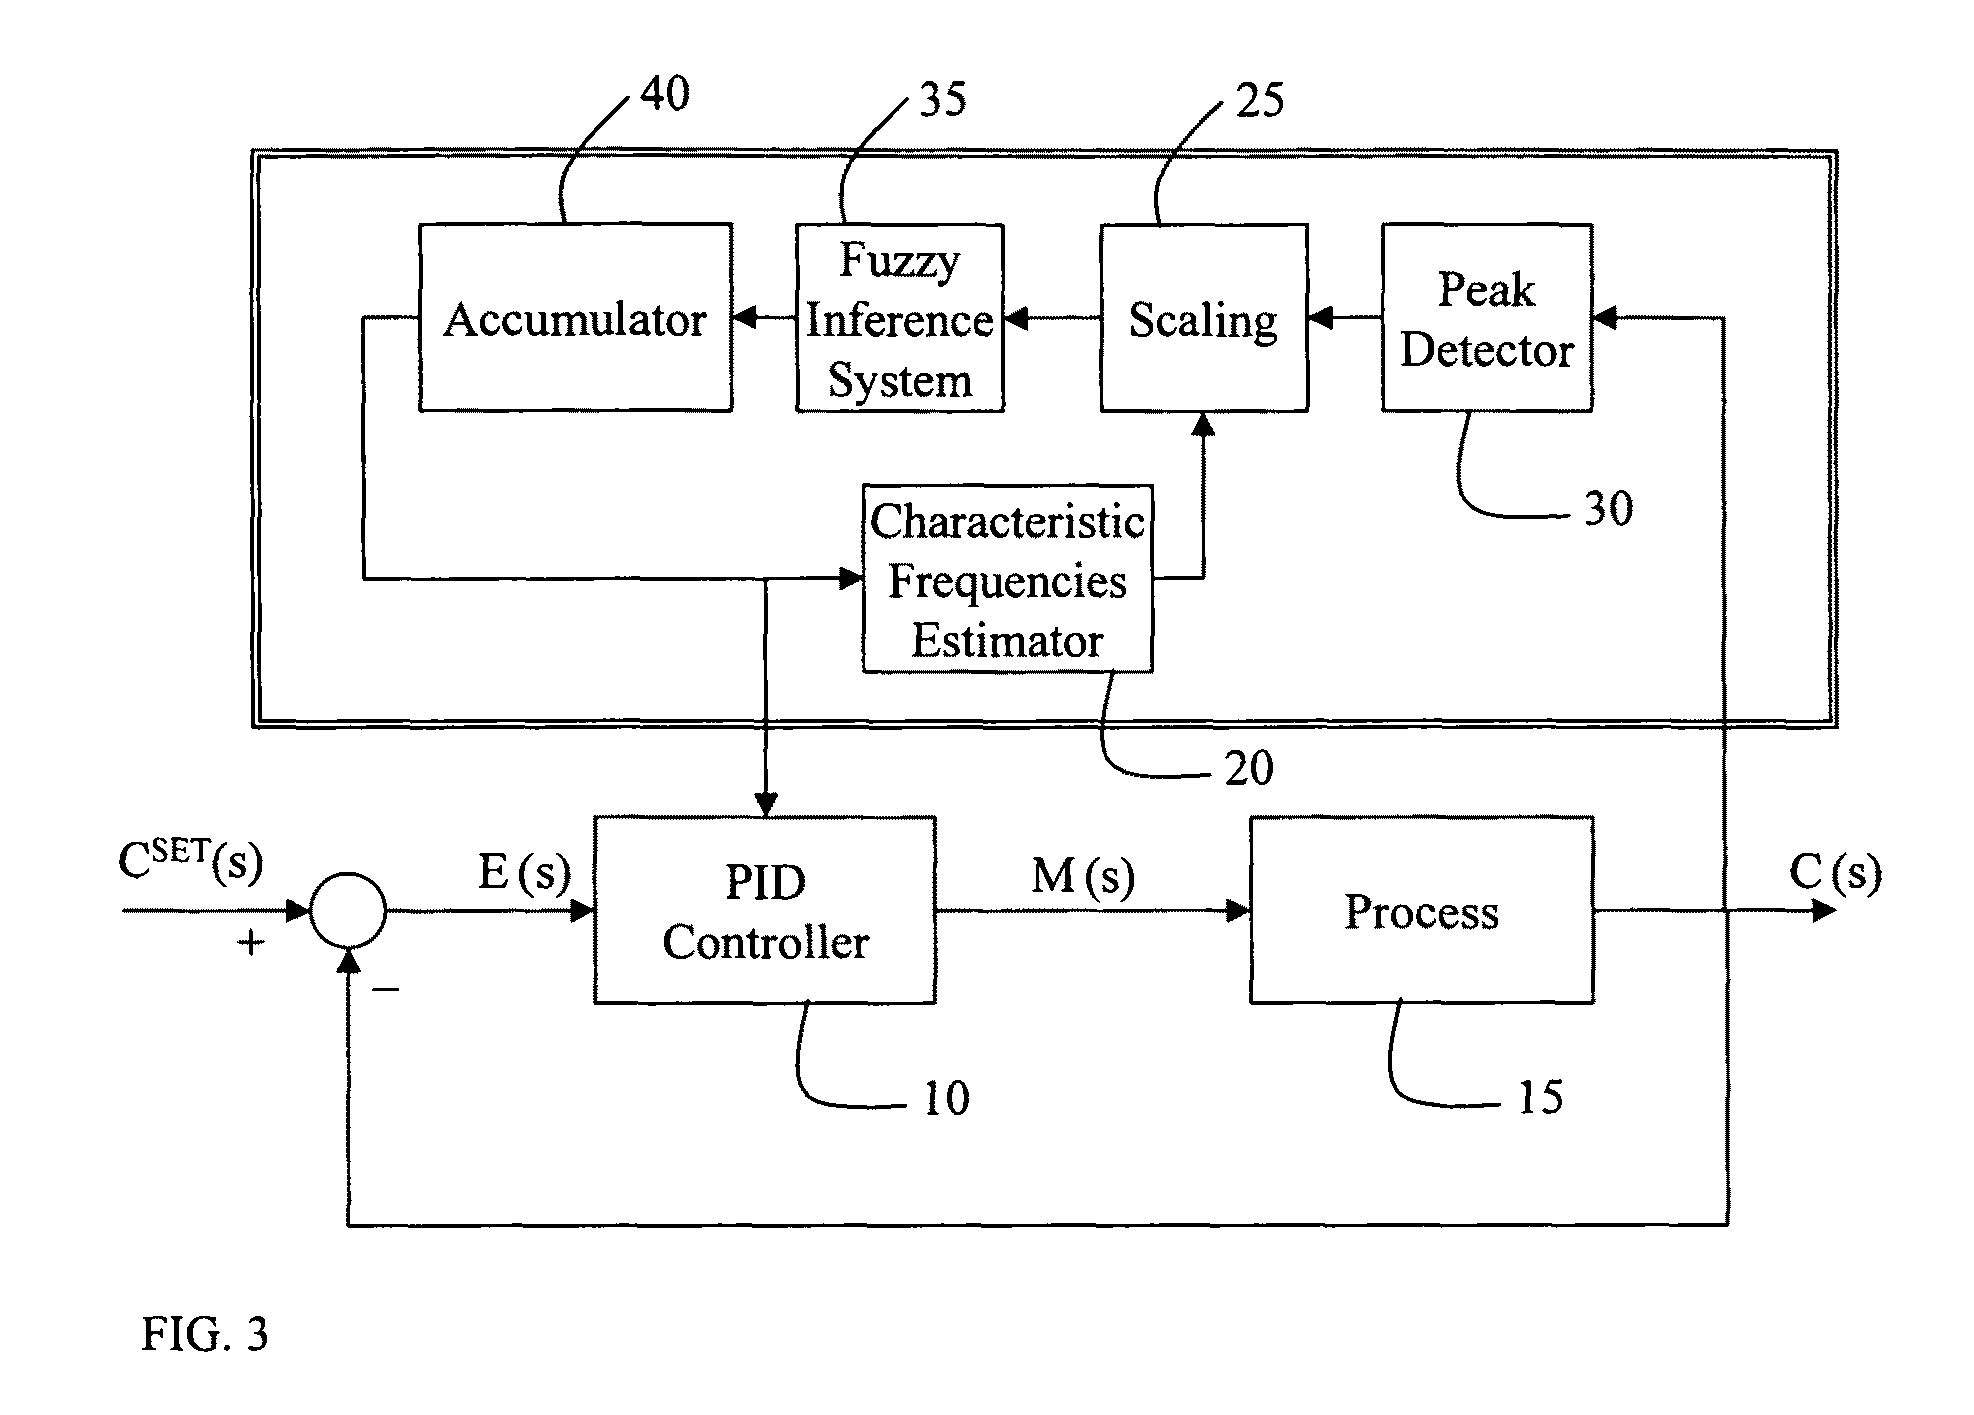 System and method to avoid oscillatory behavior in proportional-integral-derivative (PID) controllers by using fuzzy inference and modified/active damping